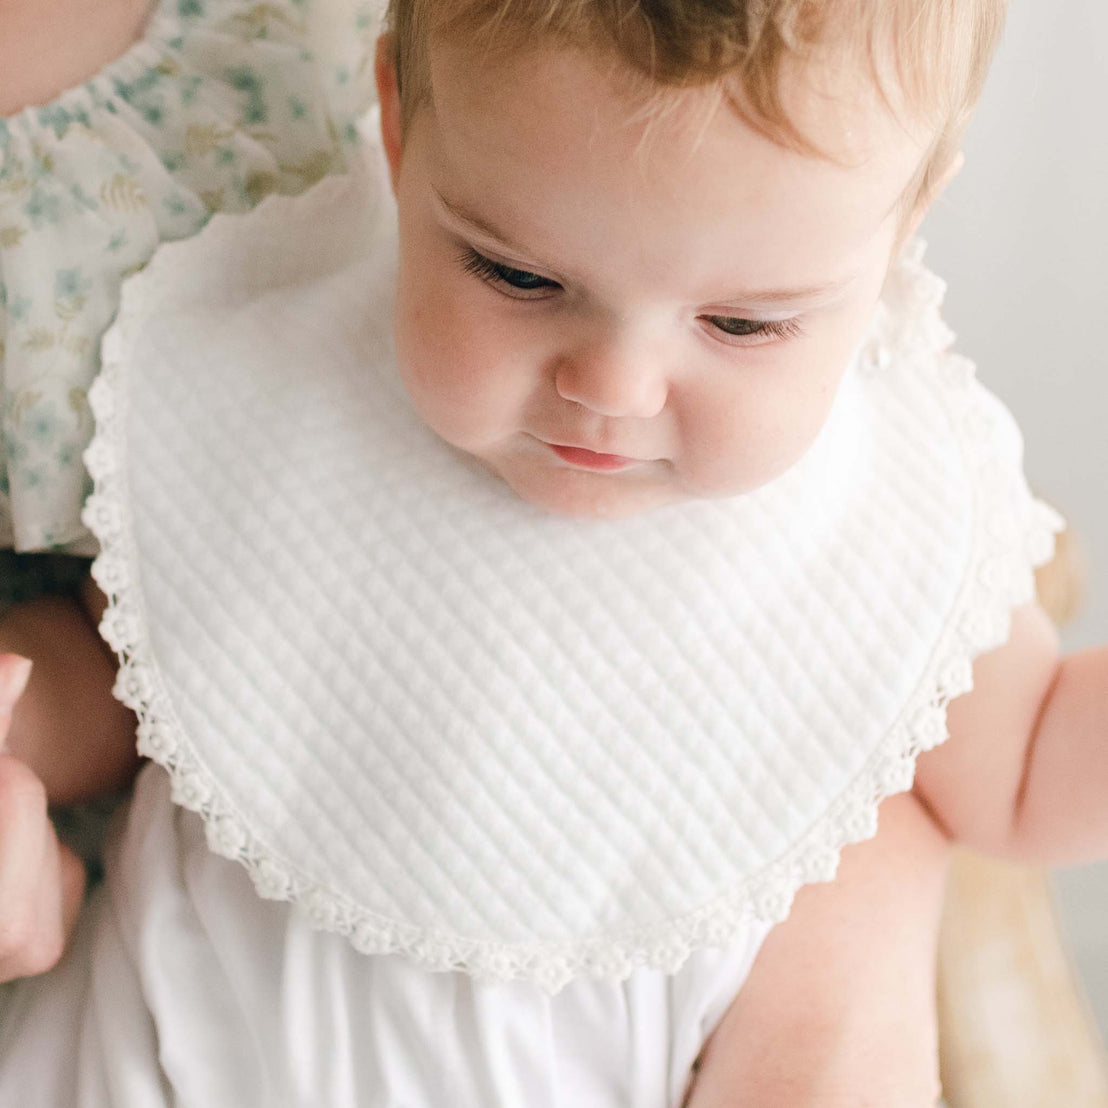 Baby wearing Ella bib lined with lace